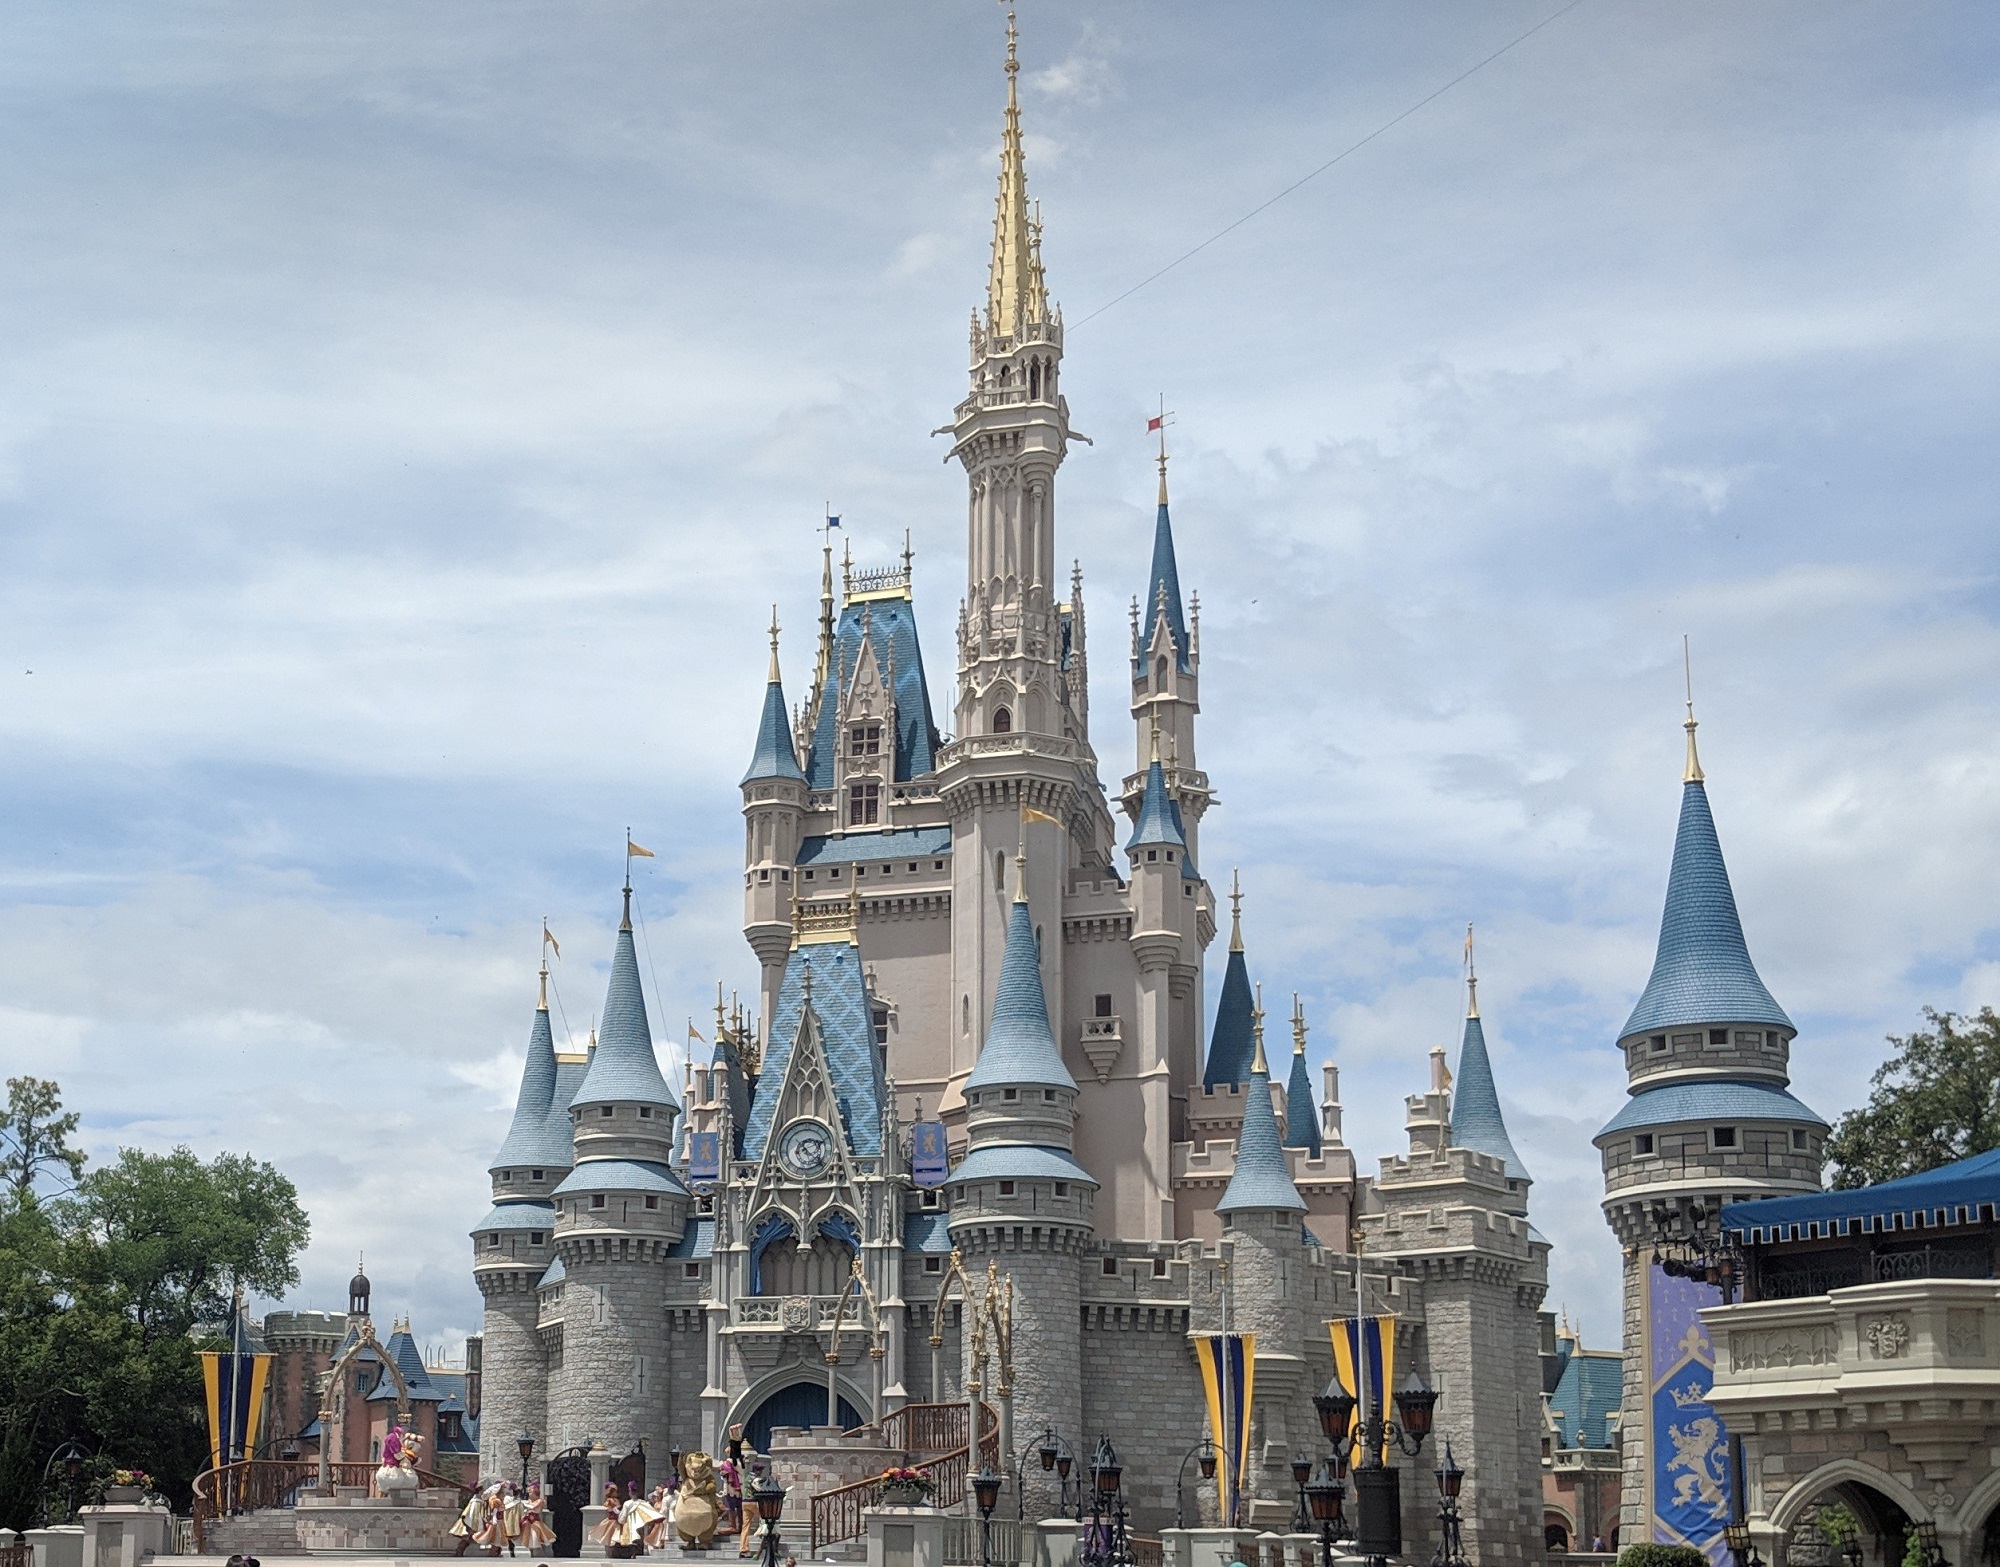 Capture Your Moment at Disney World